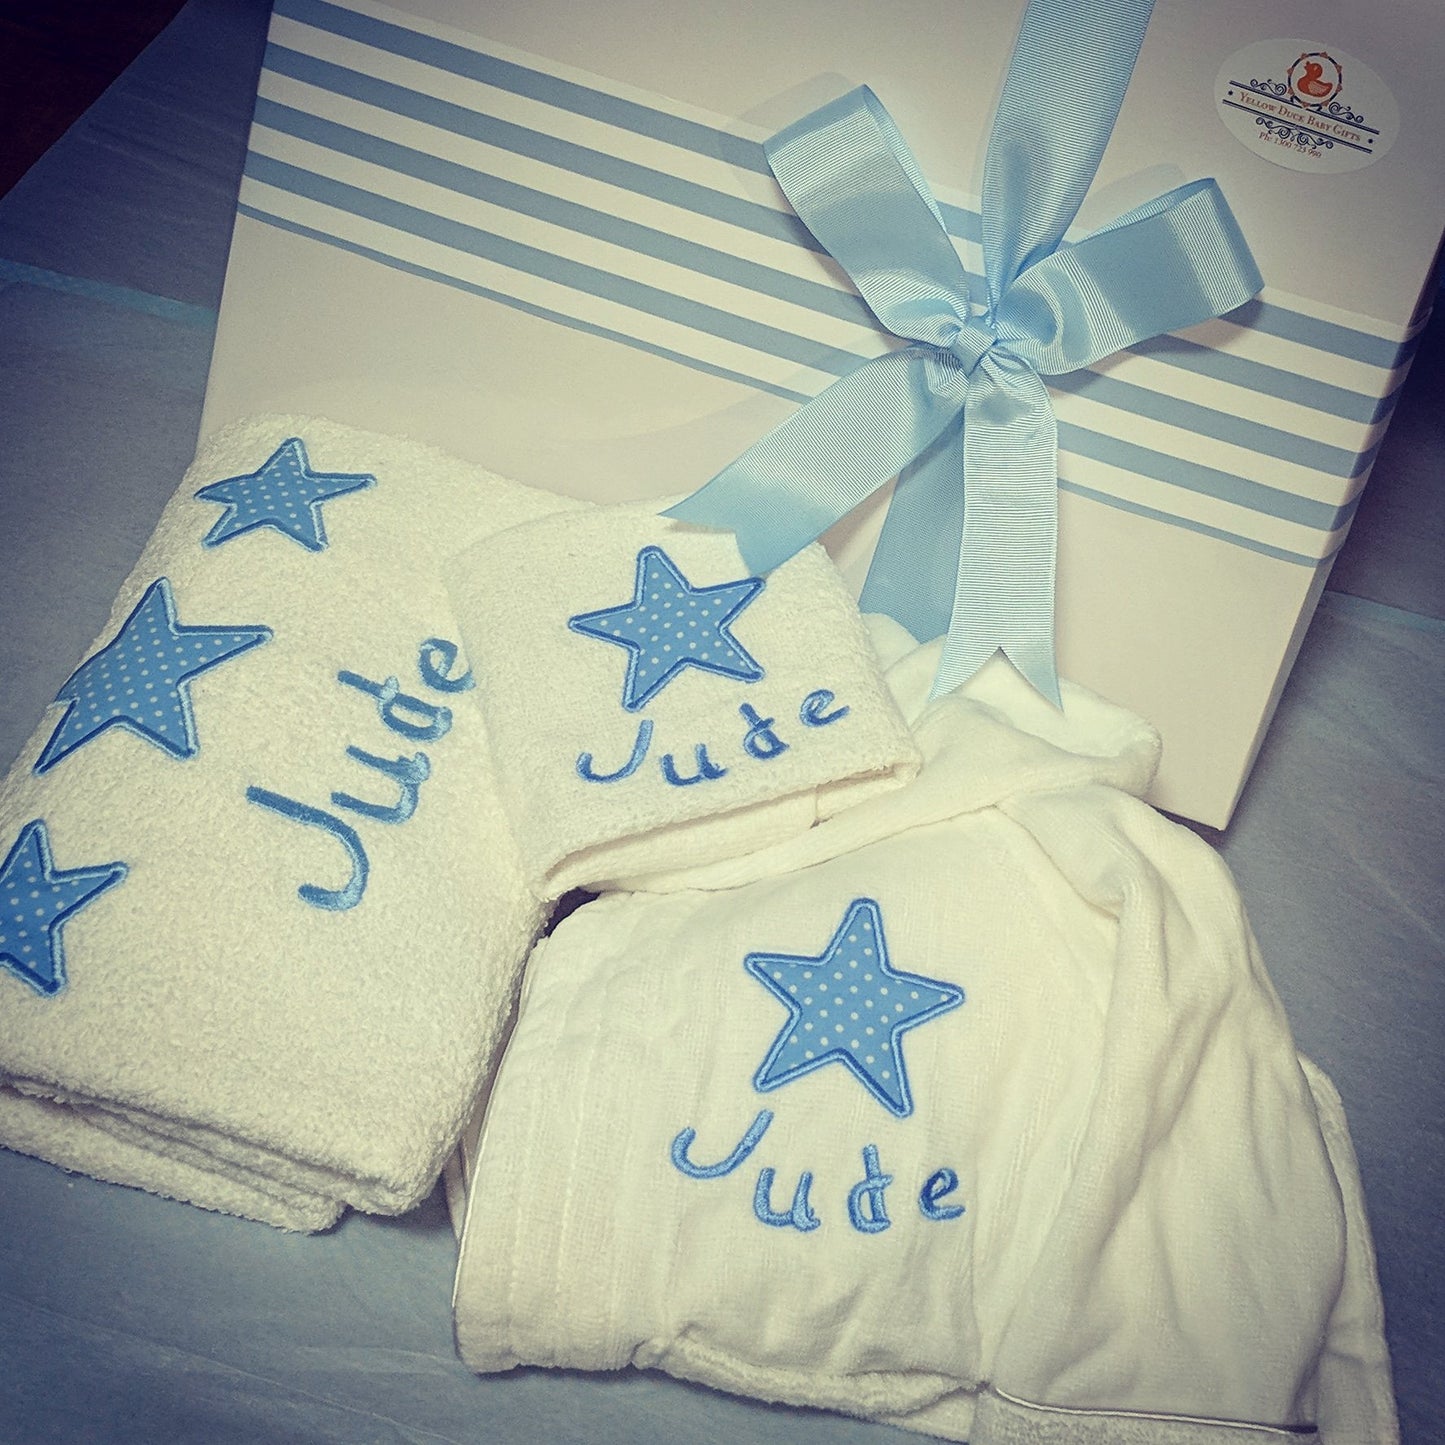 boys personalised baby bath robe and towel hamper Embroidered with stars design and personalised with baby's name